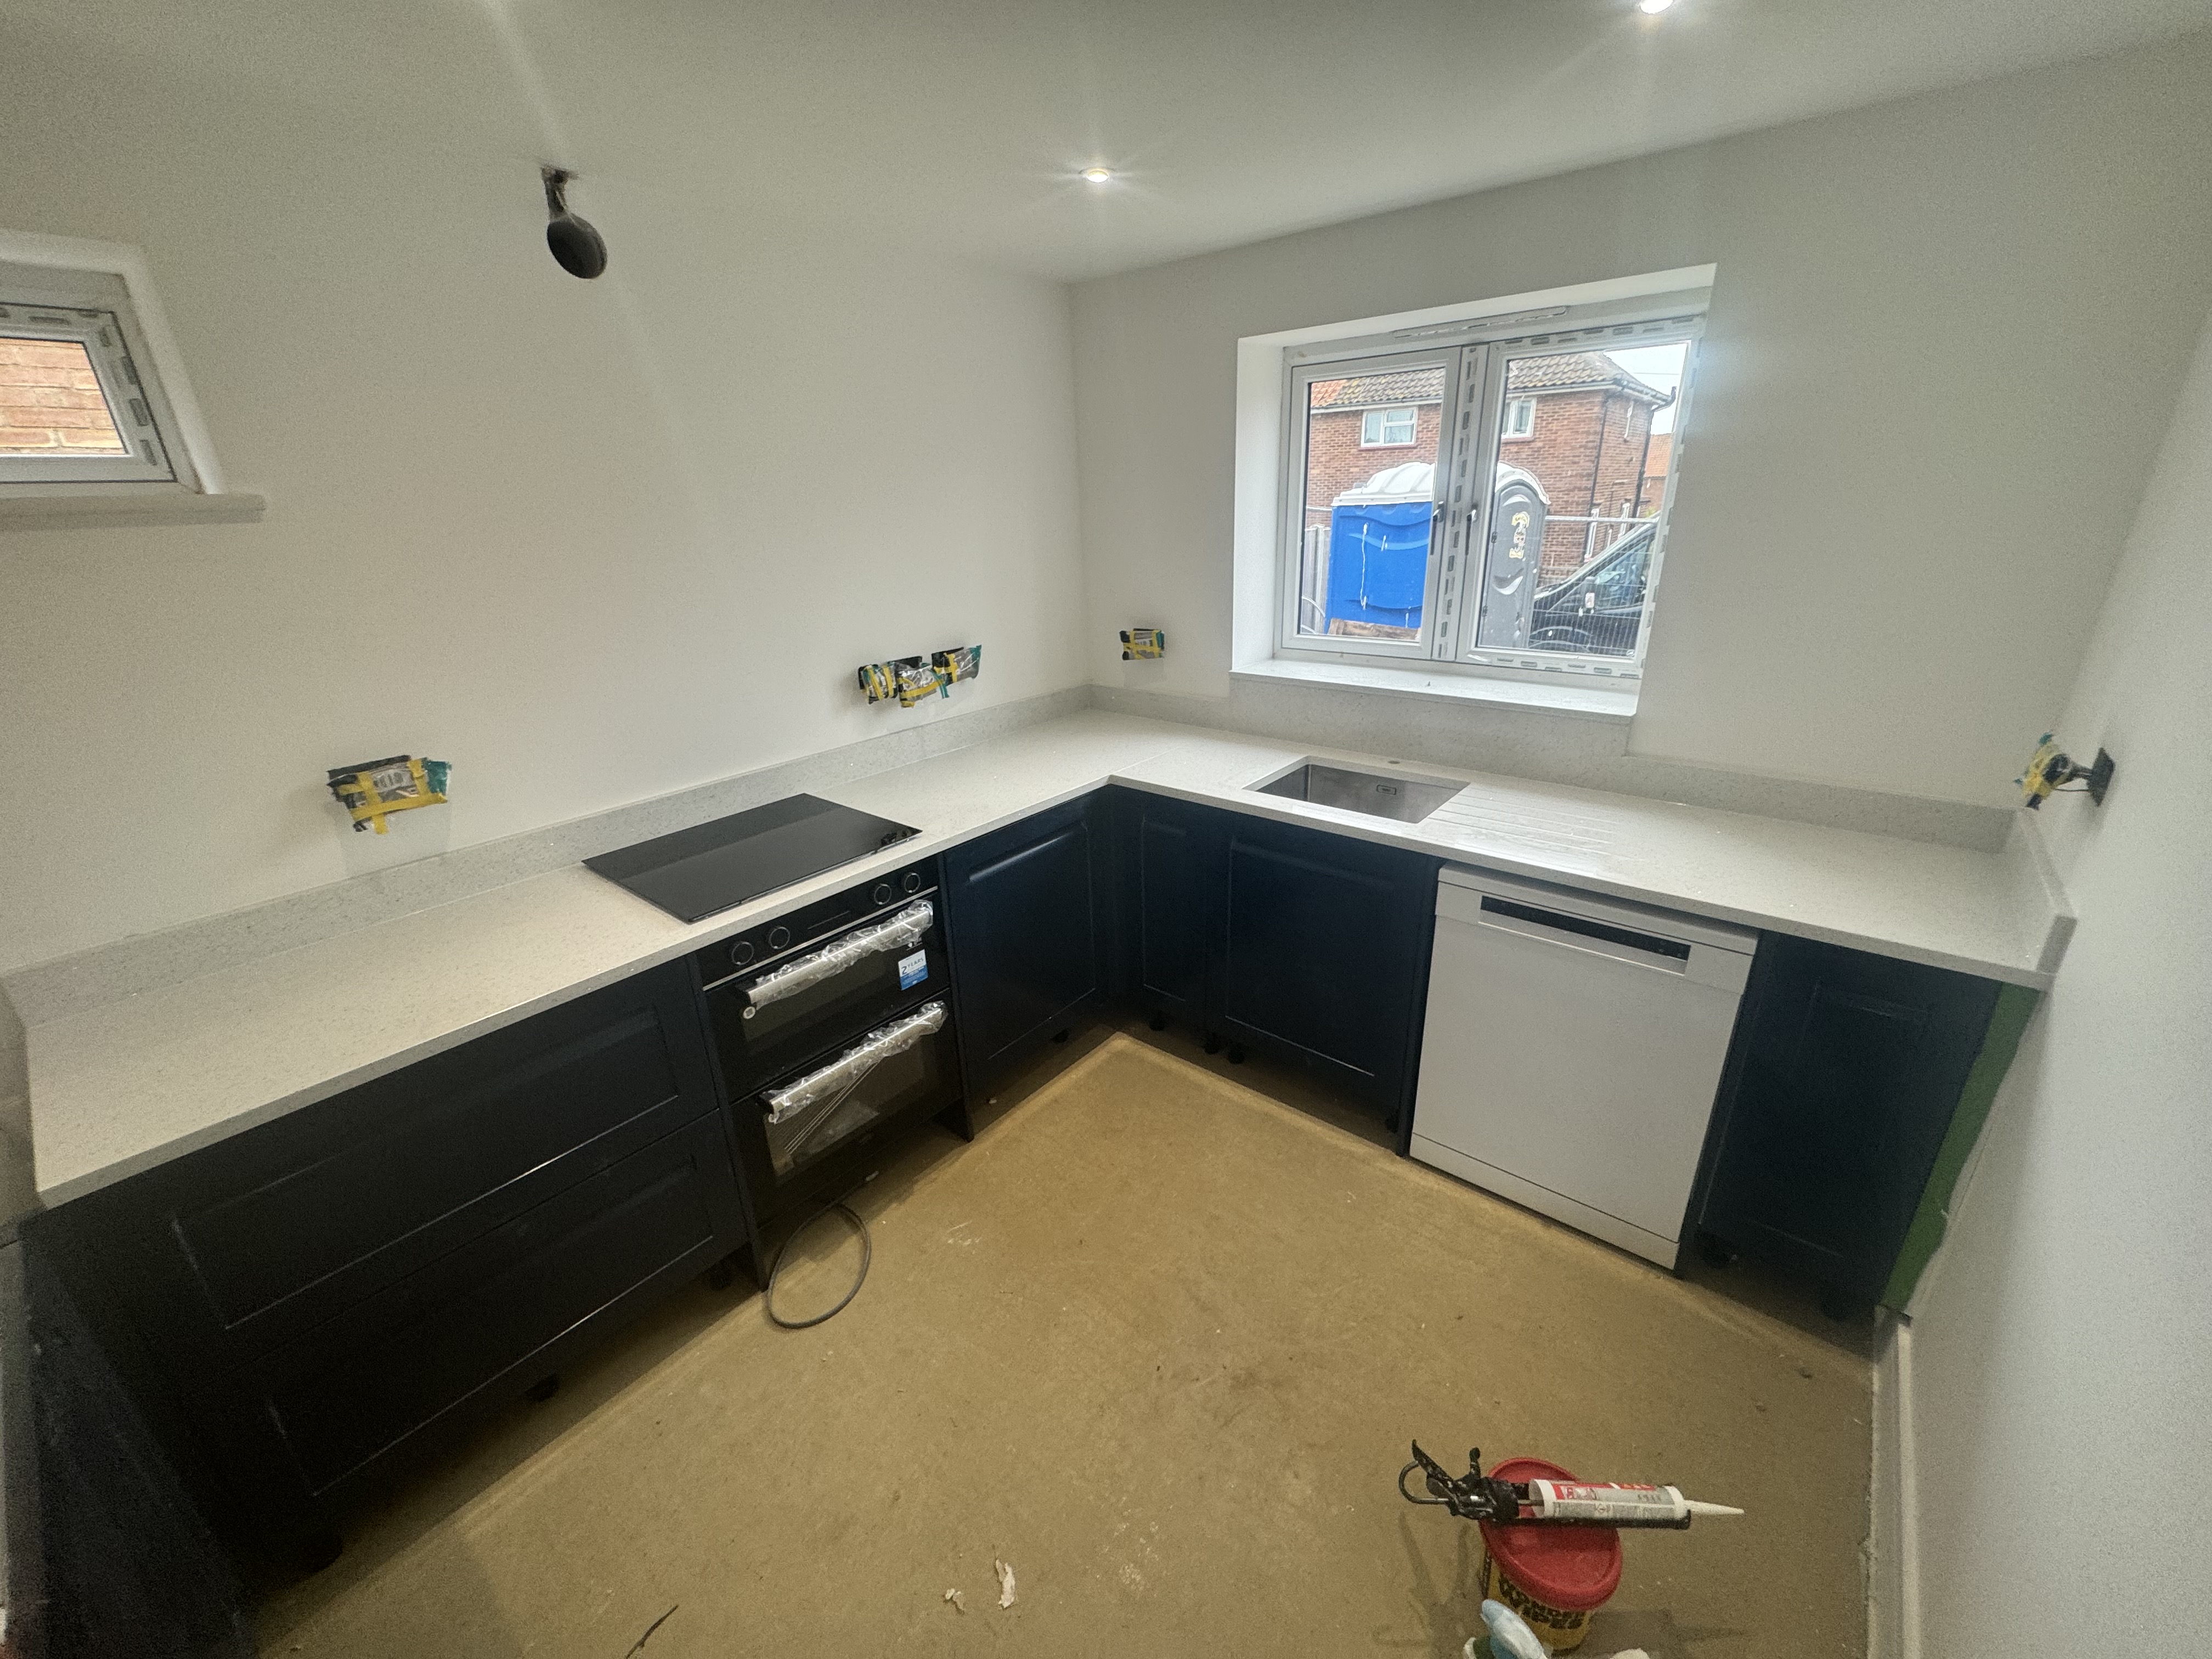 We supply Granite and Quartz Worktops in the maidstone Area. We supply Granite and Quartz Worktops in the Dartford Area. We supply Granite and Quartz Worktops in the Gravesend Area. We supply Granite and Quartz Worktops in the Gillingham Area. We supply Granite and Quartz Worktops in the Sevenoaks Area. We supply Granite and Quartz Worktops in the Tonbridge Area. We supply Granite and Quartz Worktops in the Queensborough Area. We supply Granite and Quartz Worktops in the Canterbury Area. We supply Granite and Quartz Worktops in the Sittingbourne Area. We supply Granite and Quartz Worktops in the Orpington Area. We supply Granite and Quartz Worktops in the Tonbridge Area. We supply Granite and Quartz Worktops in the Ashford Area. We supply Granite and Quartz Worktops in the Whitstable Area. We supply Granite and Quartz Worktops in the Sheerness Area. We supply Granite and Quartz Worktops in the Staplehurst Area. We supply Granite and Quartz Worktops in the Headcorn Area. We supply Granite and Quartz Worktops in the Aylesdord Area. We supply Granite and Quartz Worktops in the Edenbridge Area. We supply Granite and Quartz Worktops in the Rainham Area. We supply Granite and Quartz Worktops in the Upchurch Area. We supply Granite and Quartz Worktops in the Meopham Area.